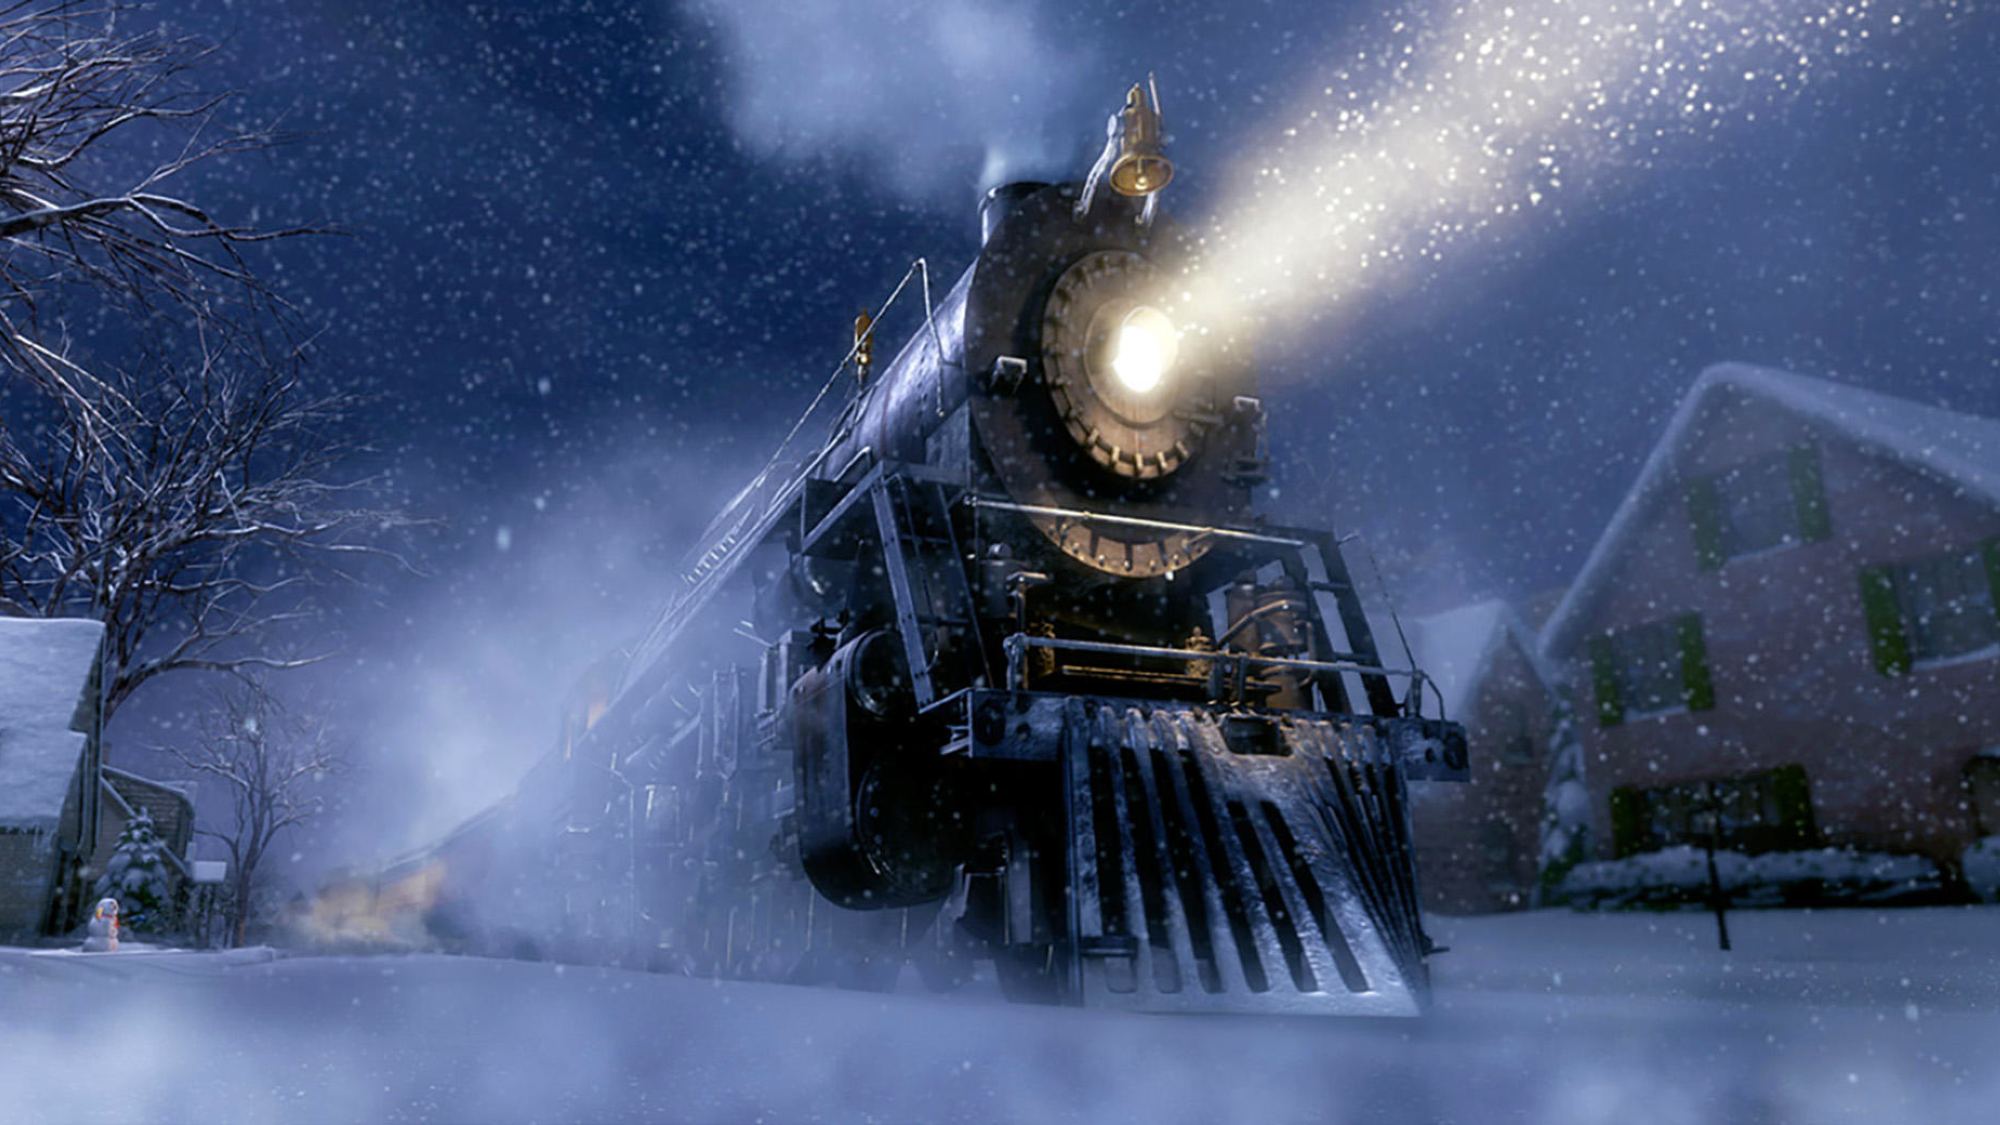 The train in The Polar Express